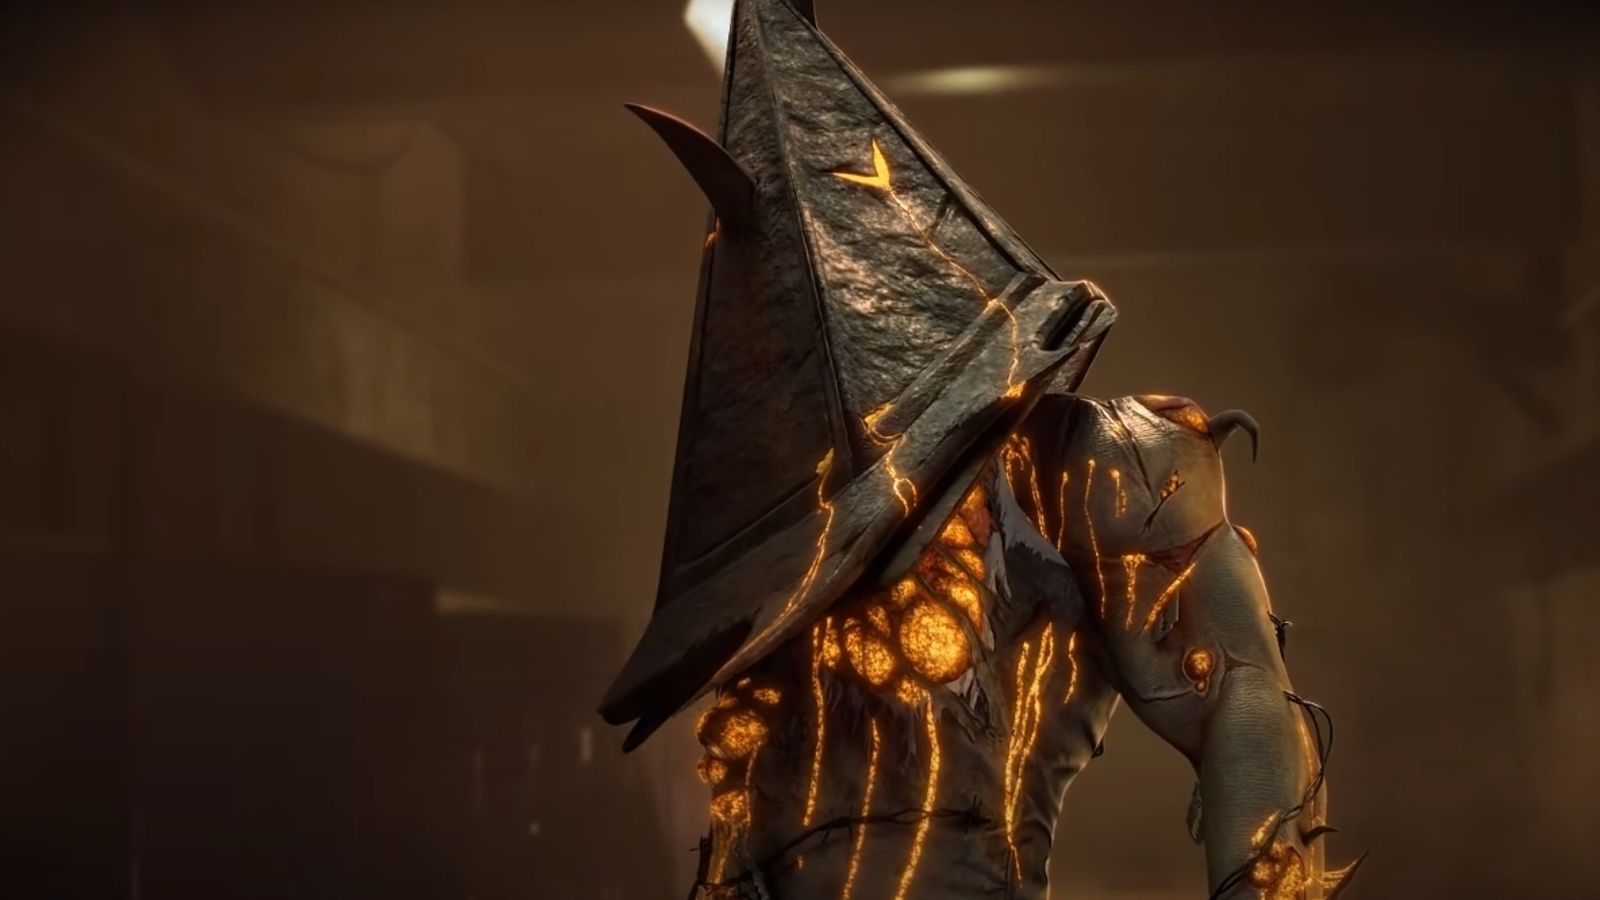 Pyramid Head haunts Dead by Daylight in new costume